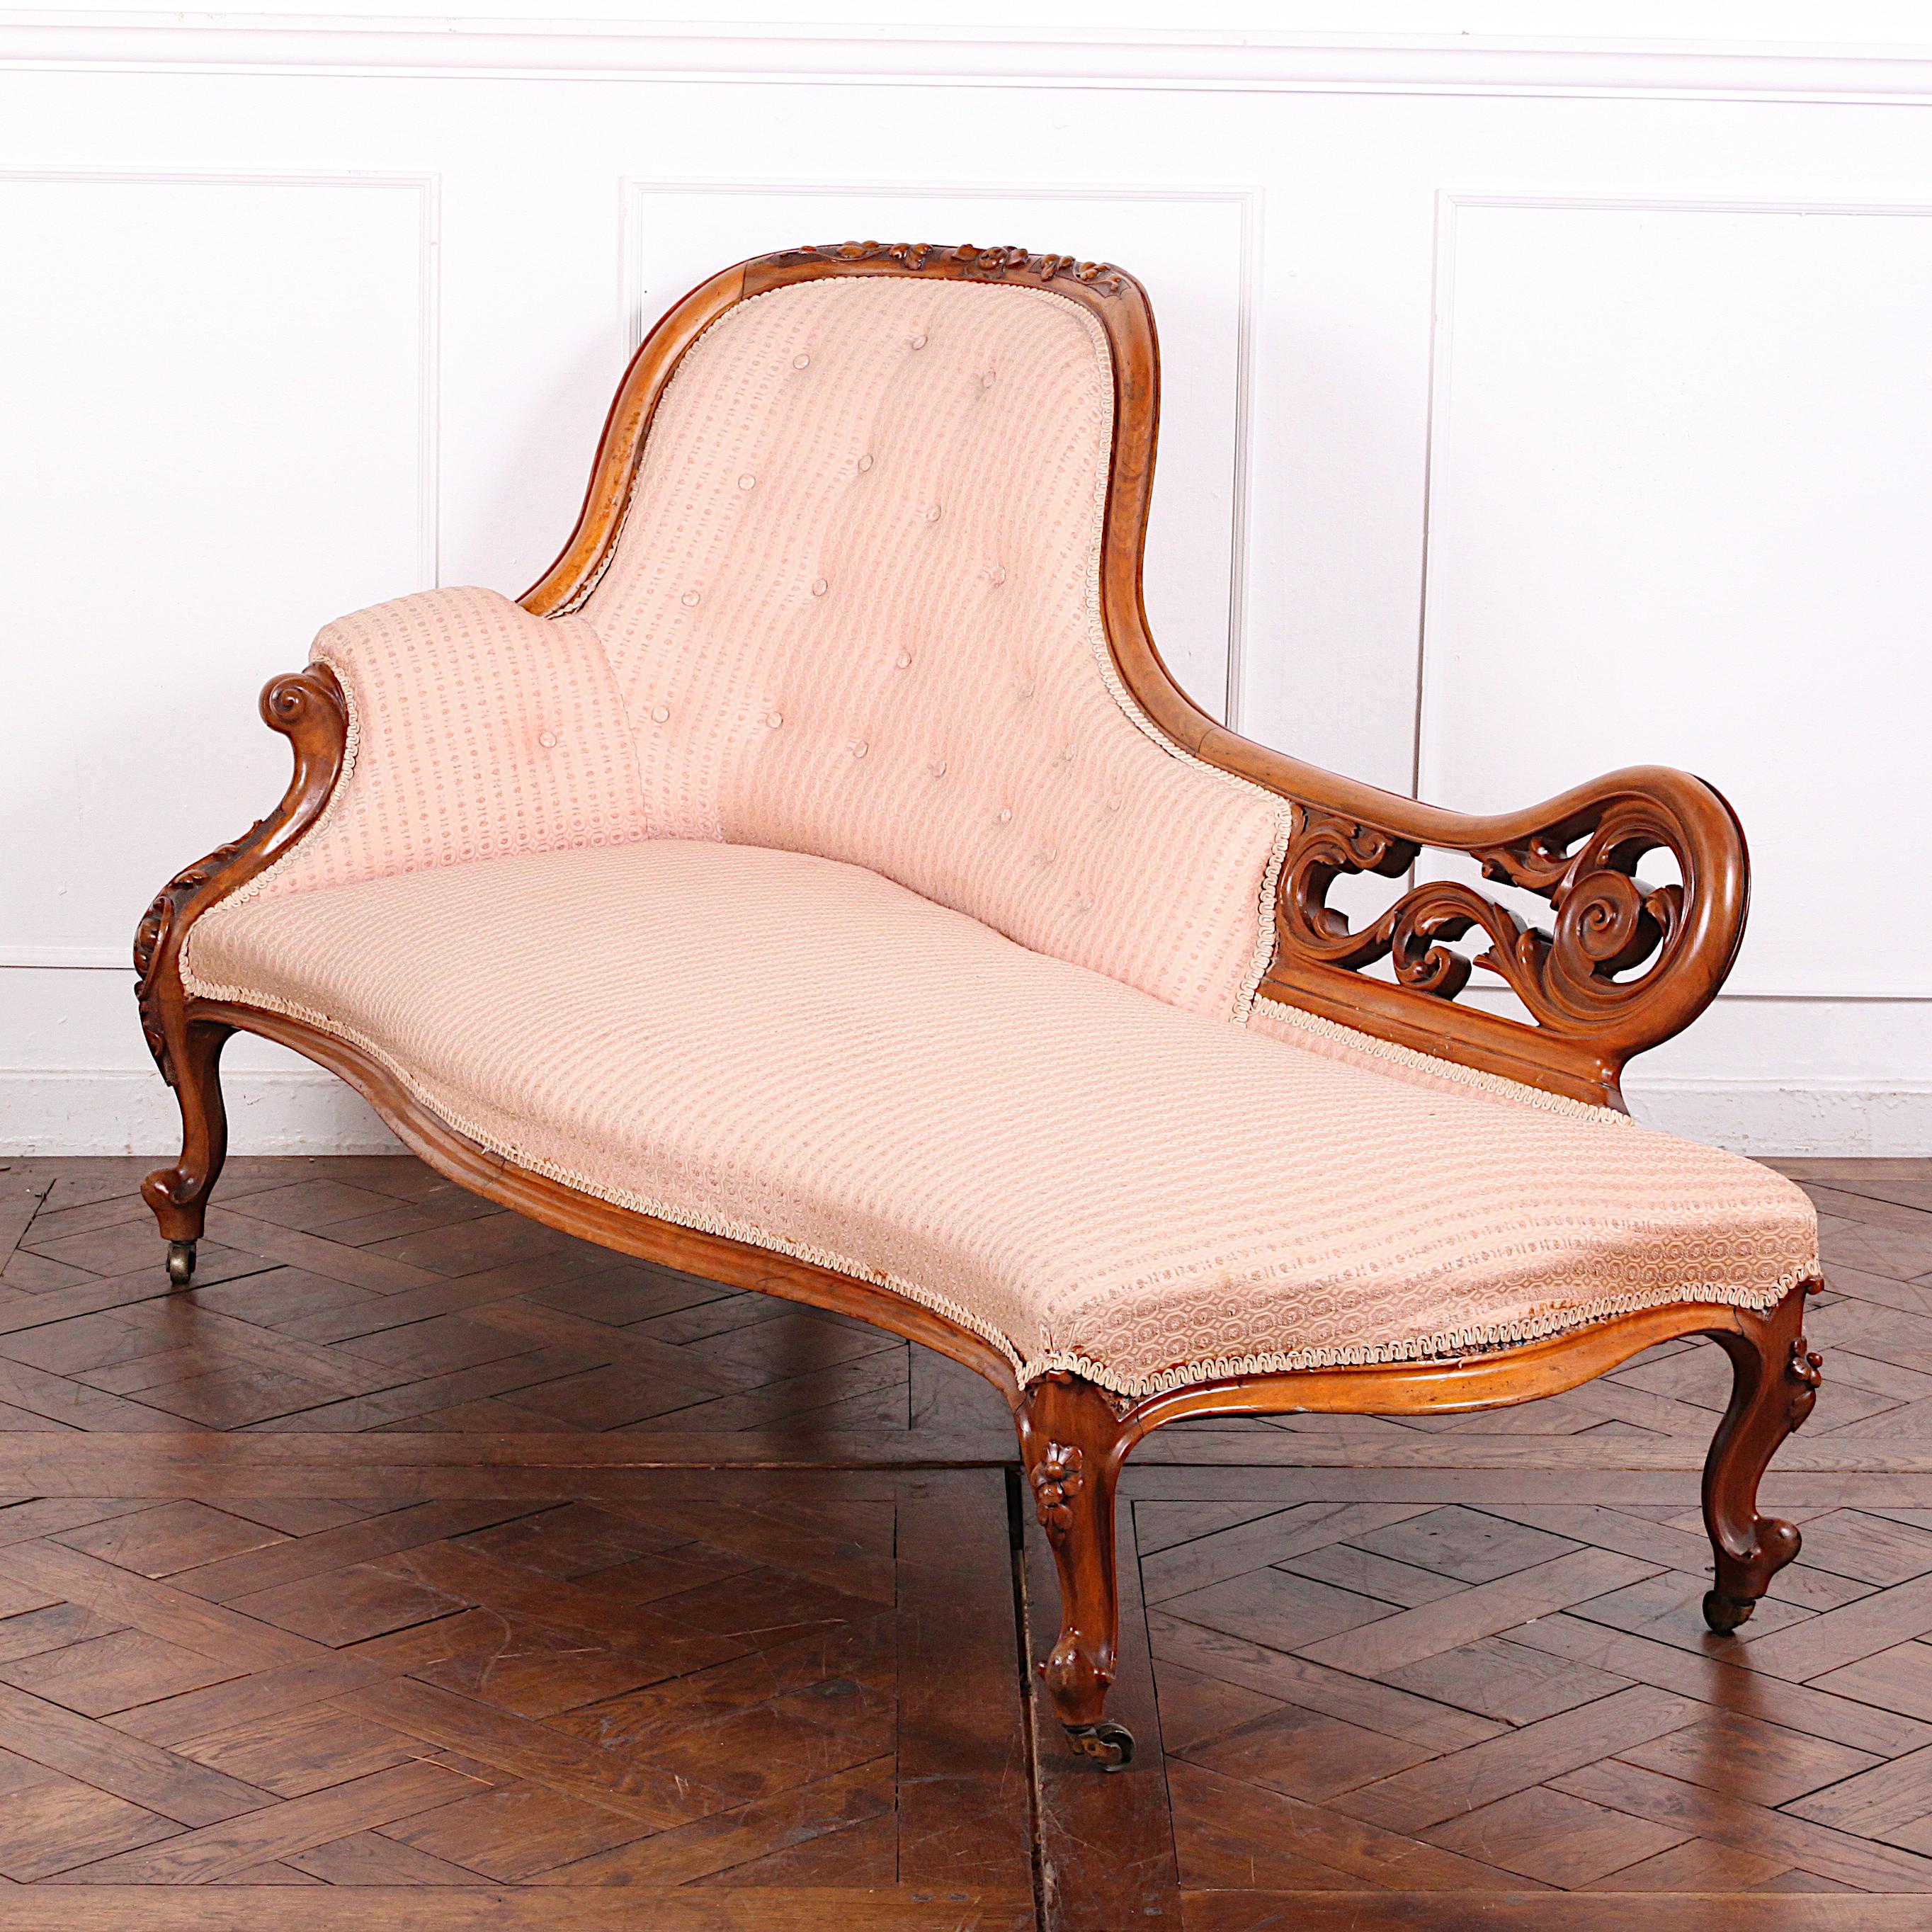 Late 19th Century English Victorian Carved Walnut Chaise Lounge Recamier